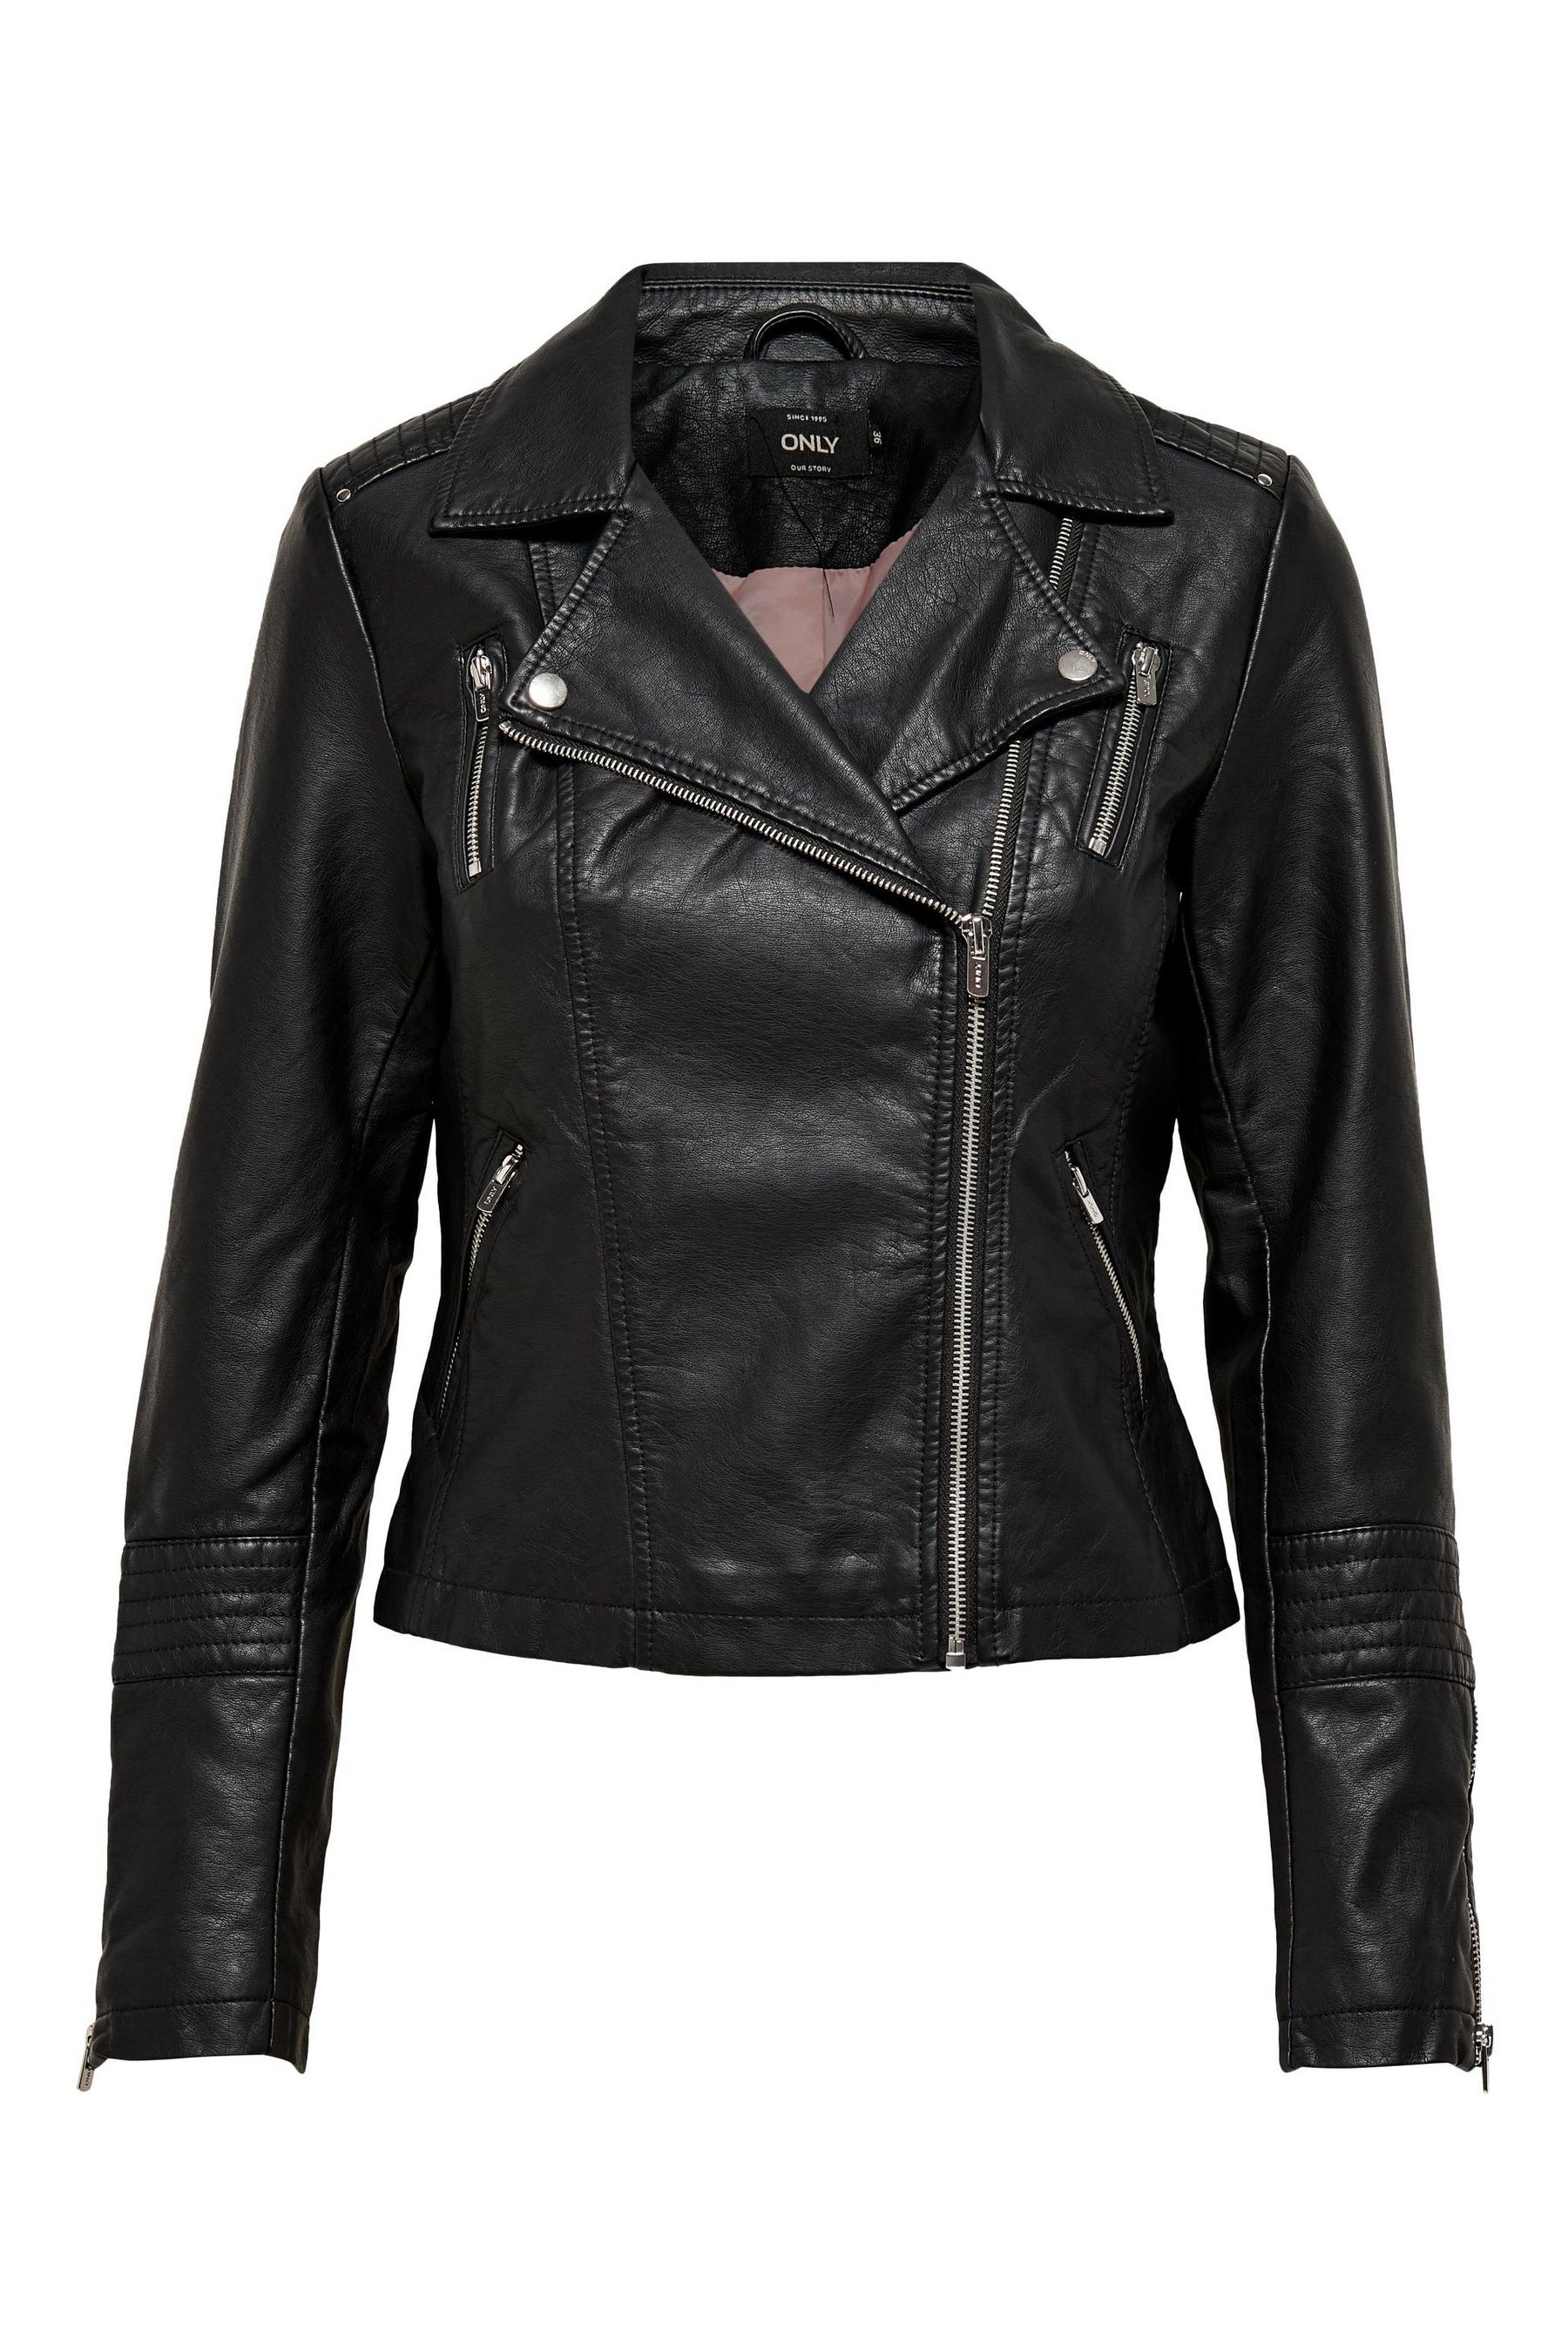 Buy Only Black Faux Leather Biker Jacket from the Next UK online shop